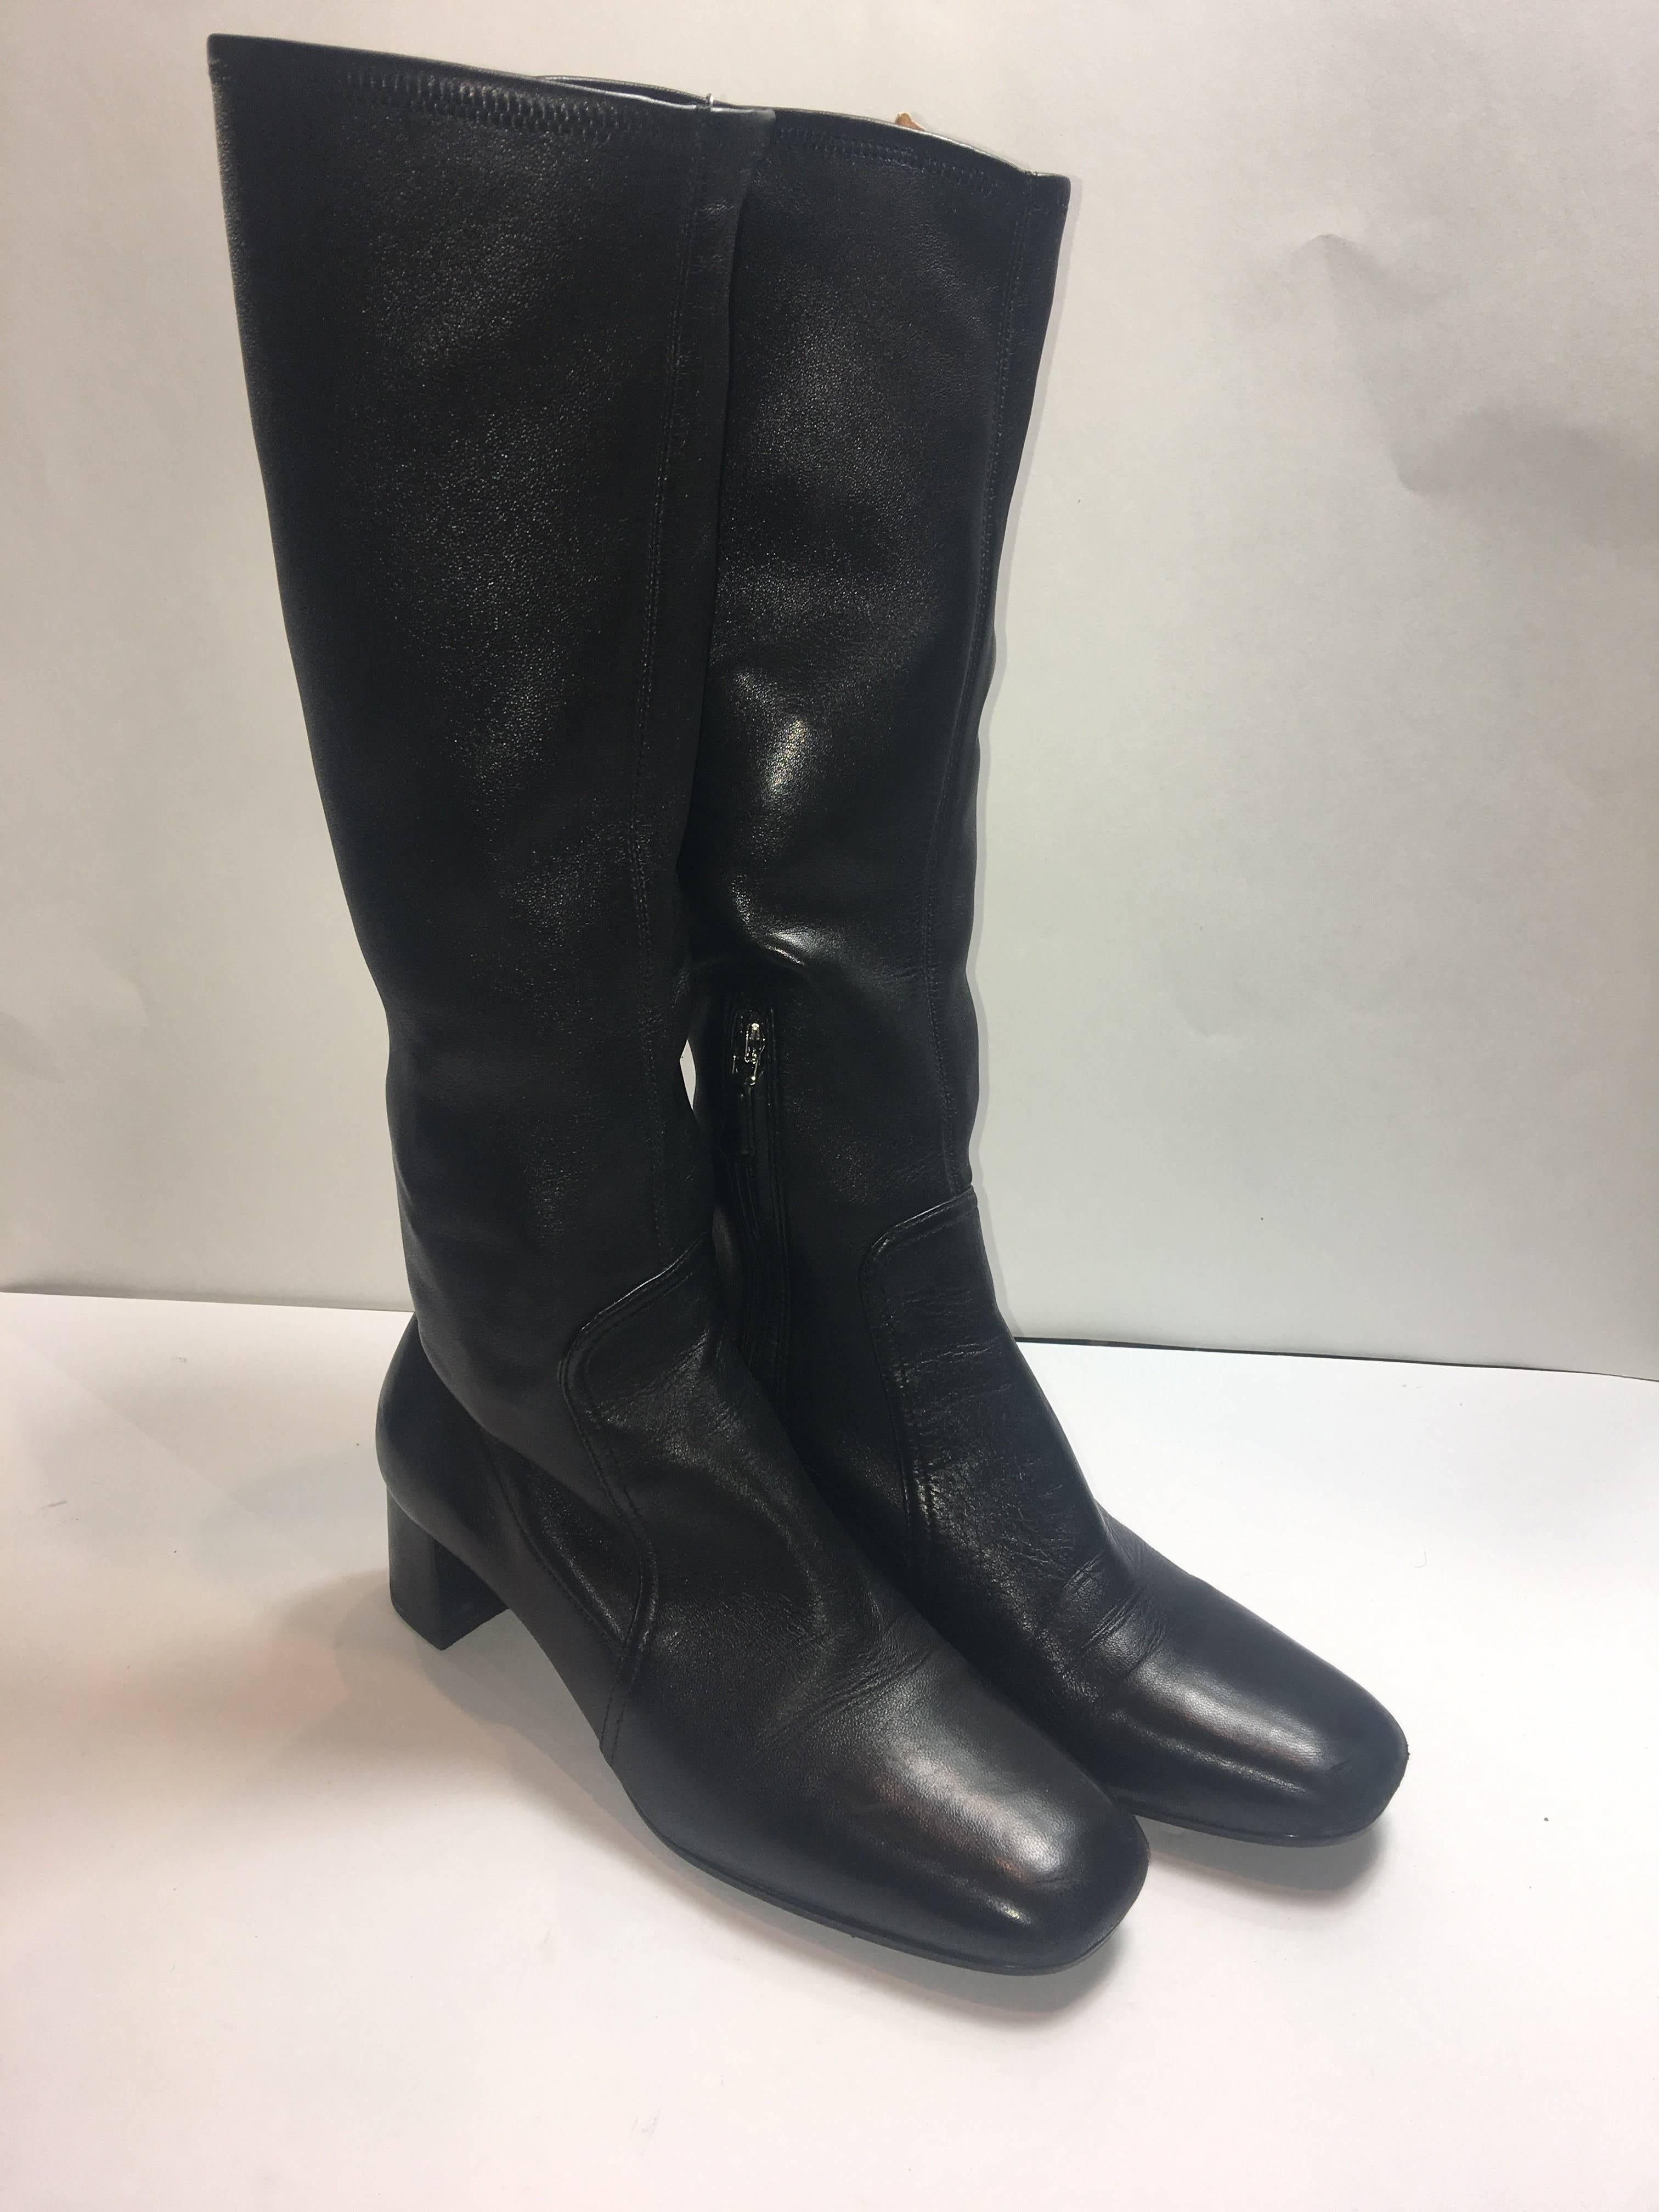 Prada Calf High Boots with Inside Zip, Small Chunk Heel and Squared Toe. 